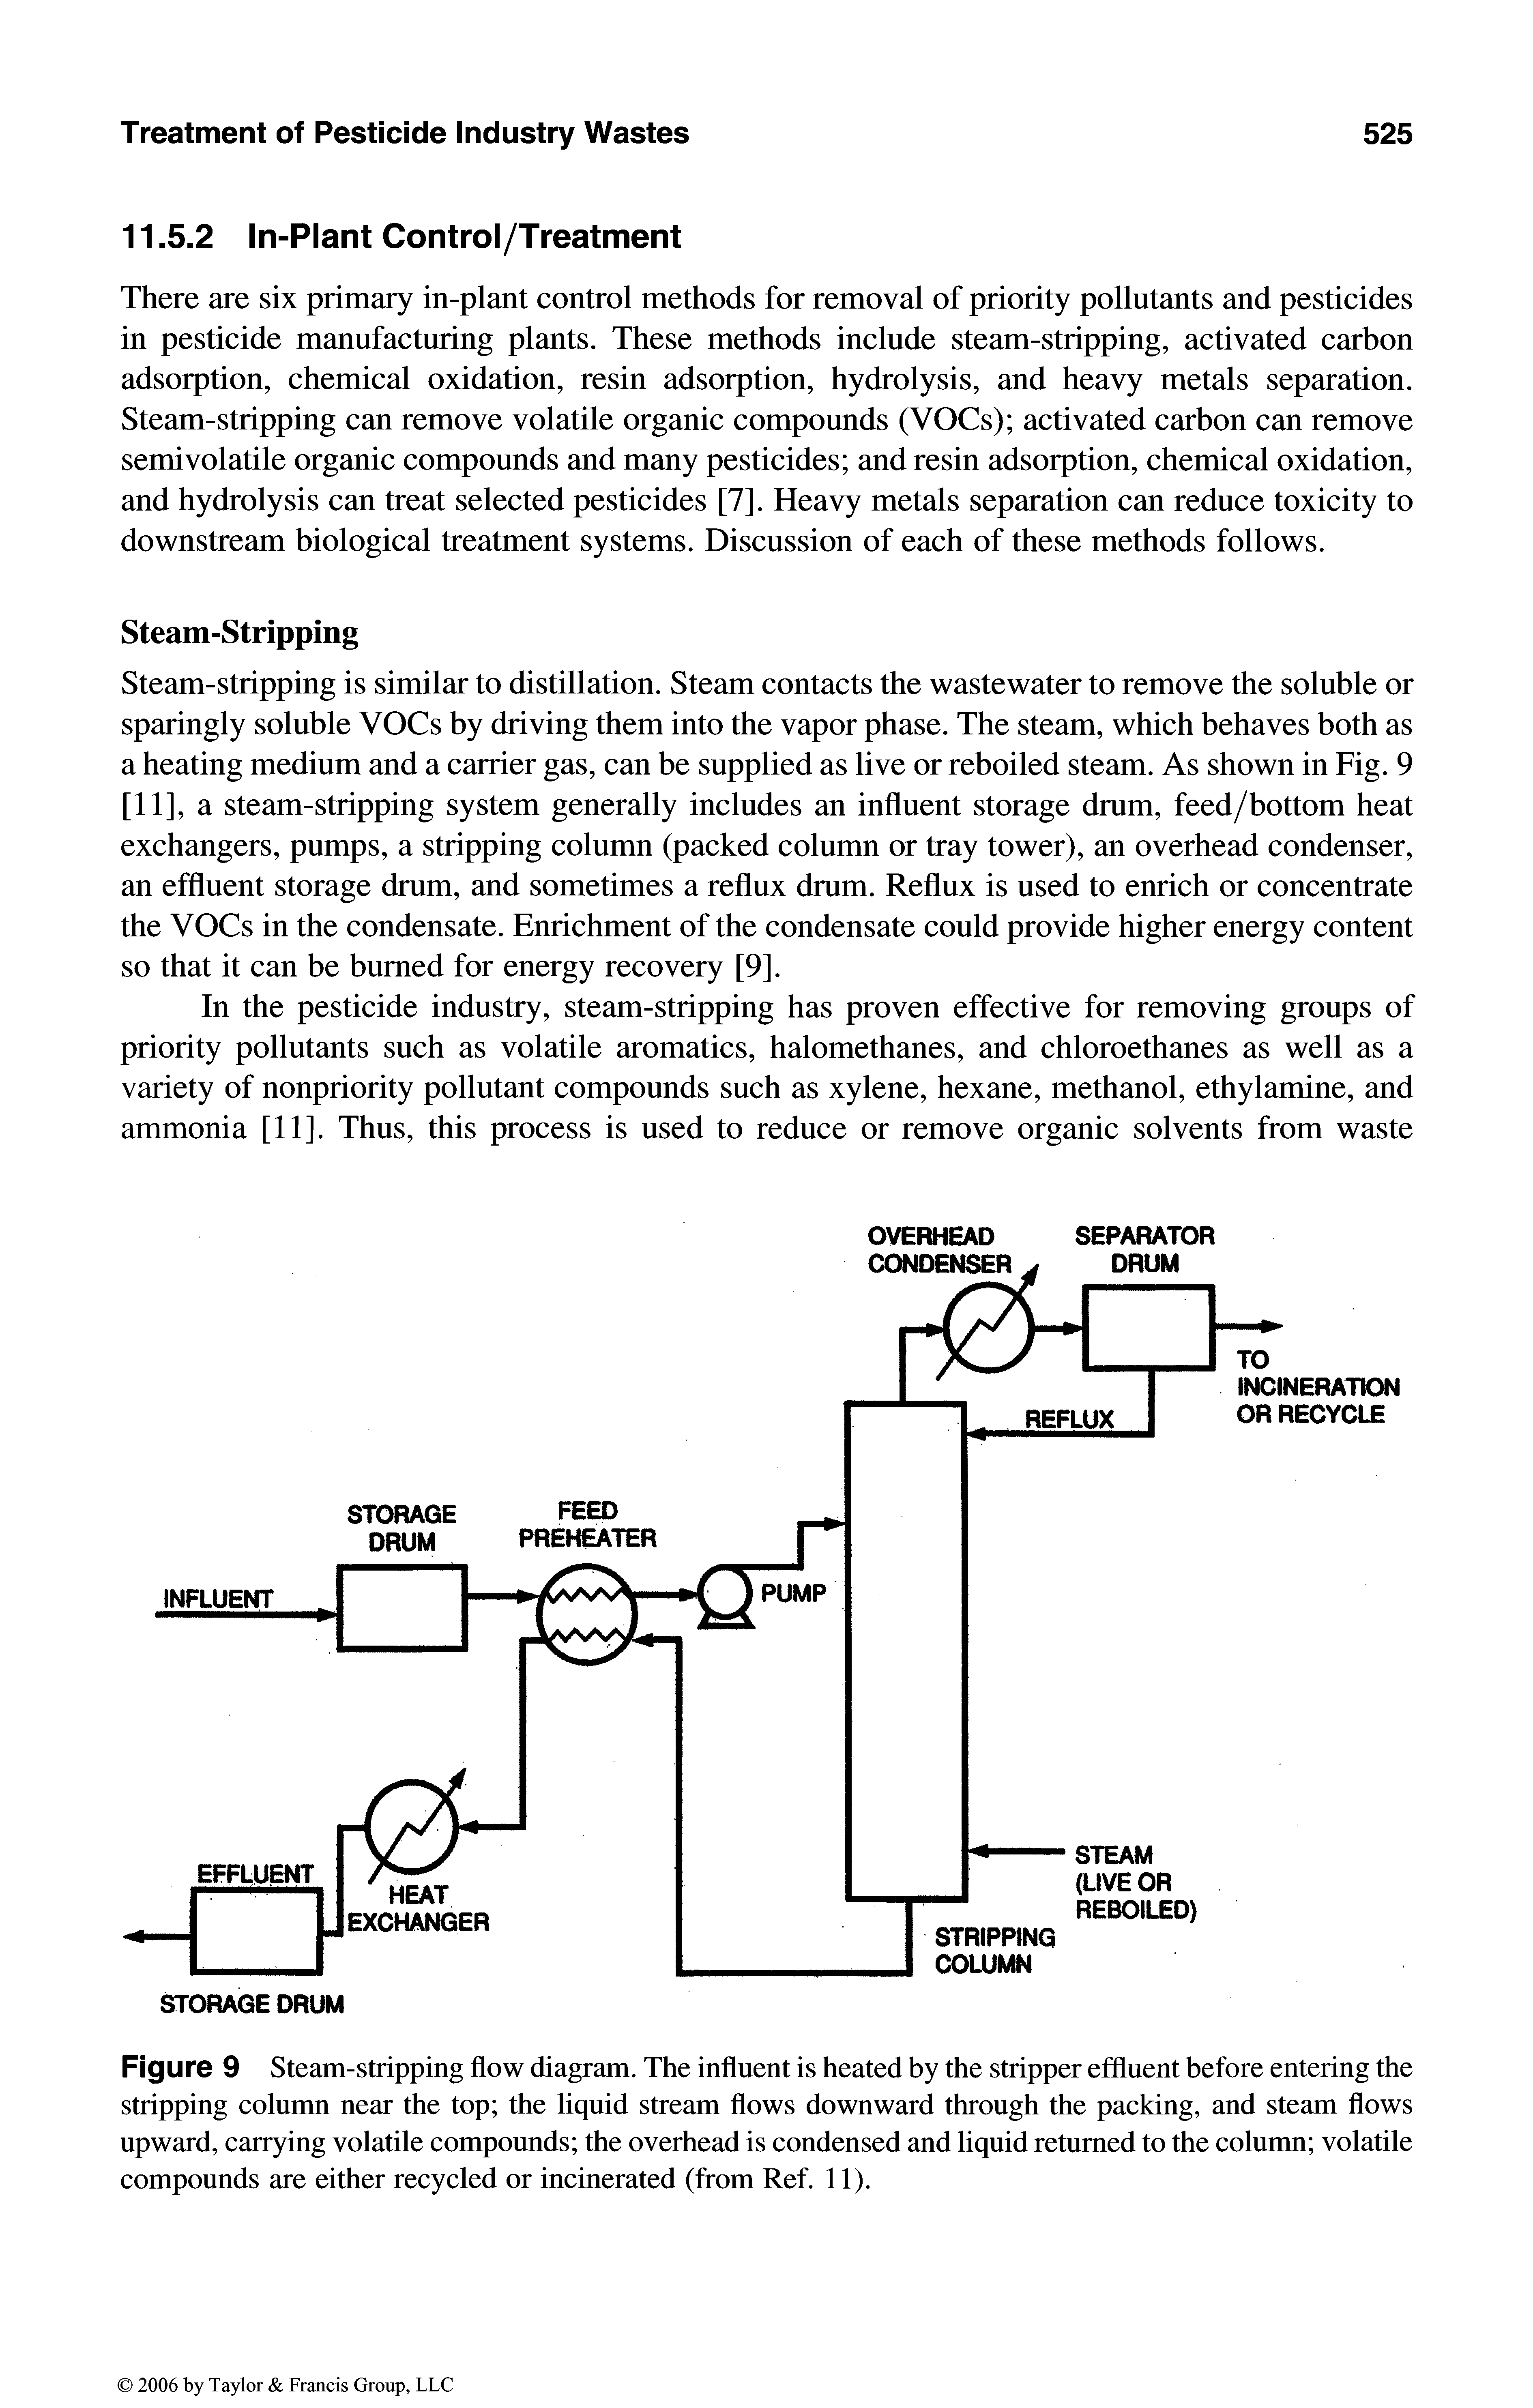 Figure 9 Steam-stripping flow diagram. The influent is heated by the stripper effluent before entering the stripping column near the top the liquid stream flows downward through the packing, and steam flows upward, carrying volatile compounds the overhead is condensed and liquid returned to the column volatile compounds are either recycled or incinerated (from Ref. 11).